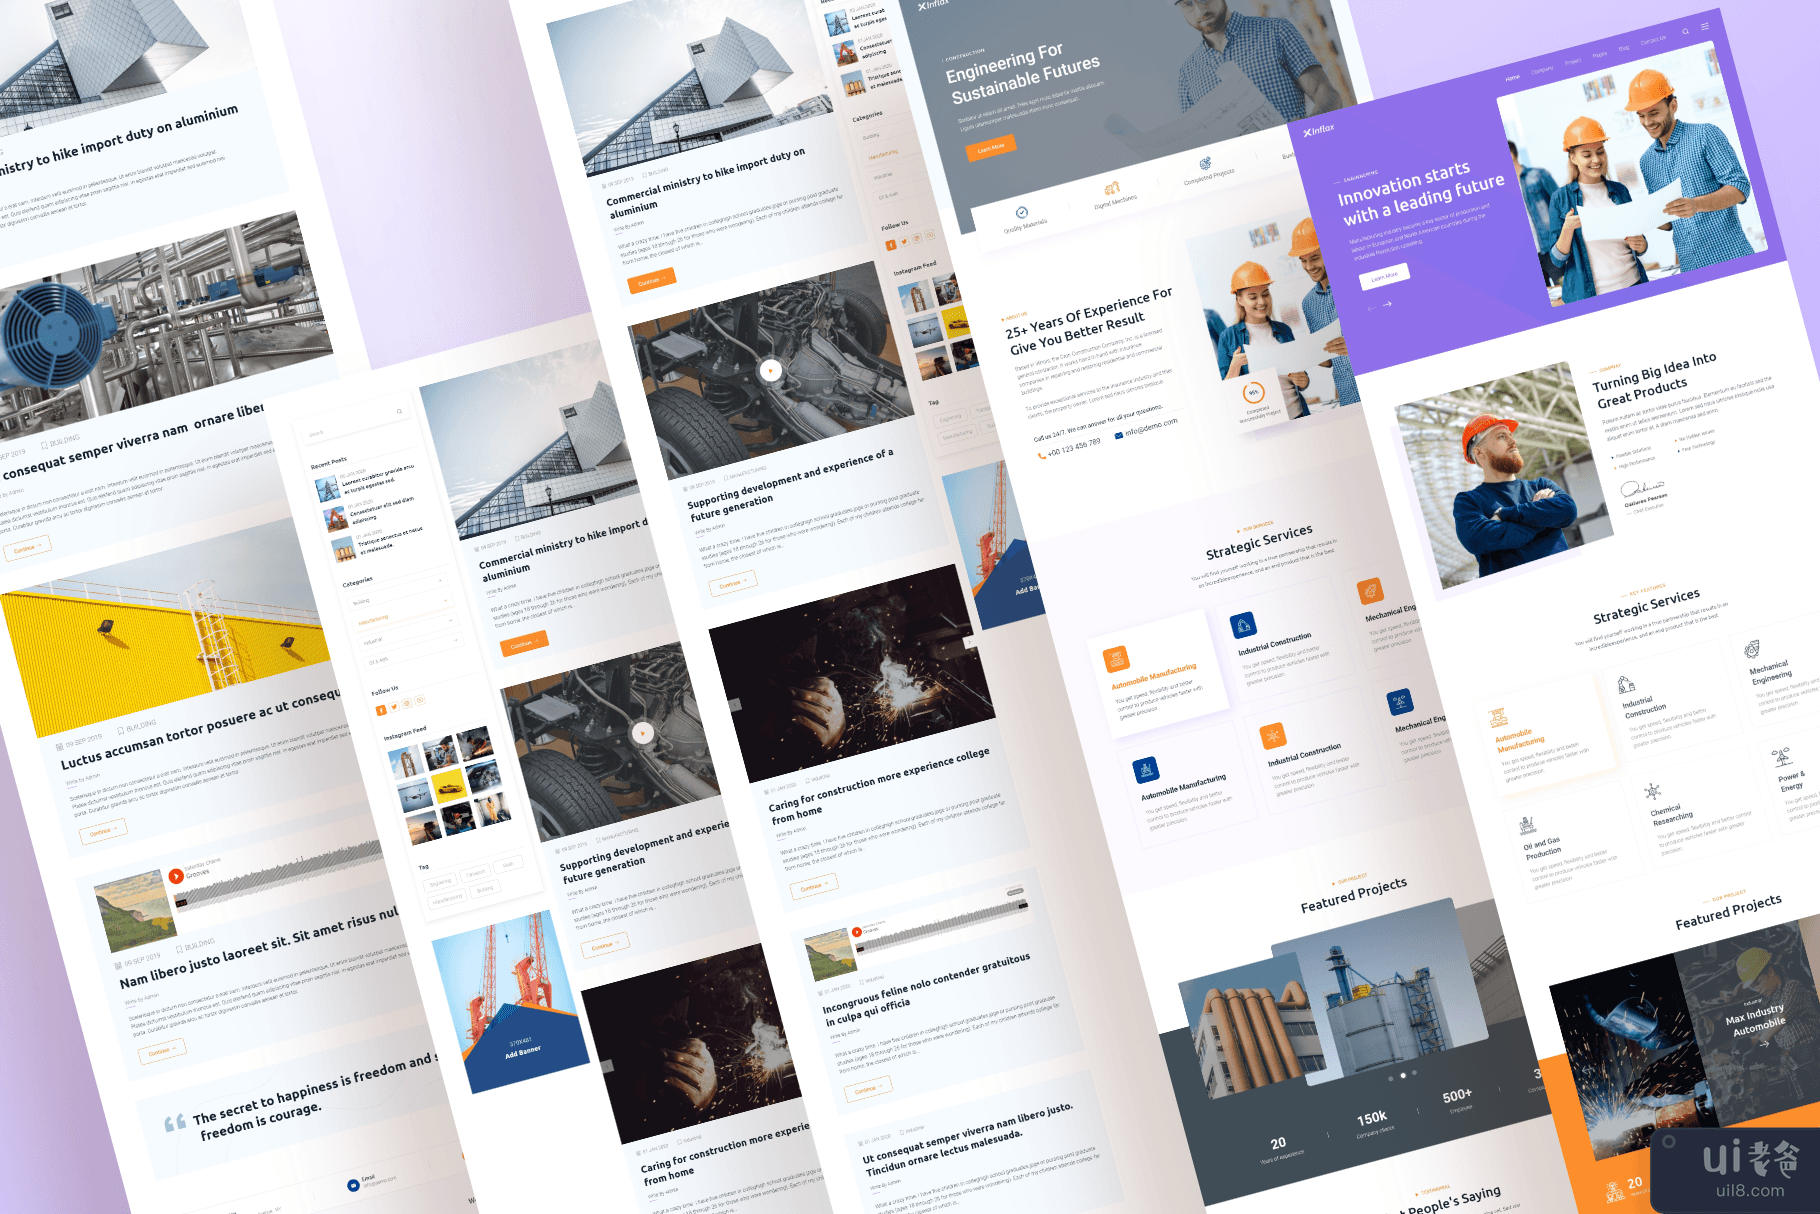 Xinflax - 工业 Adobe XD 模板(Xinflax - Industrial Adobe XD Template)插图1